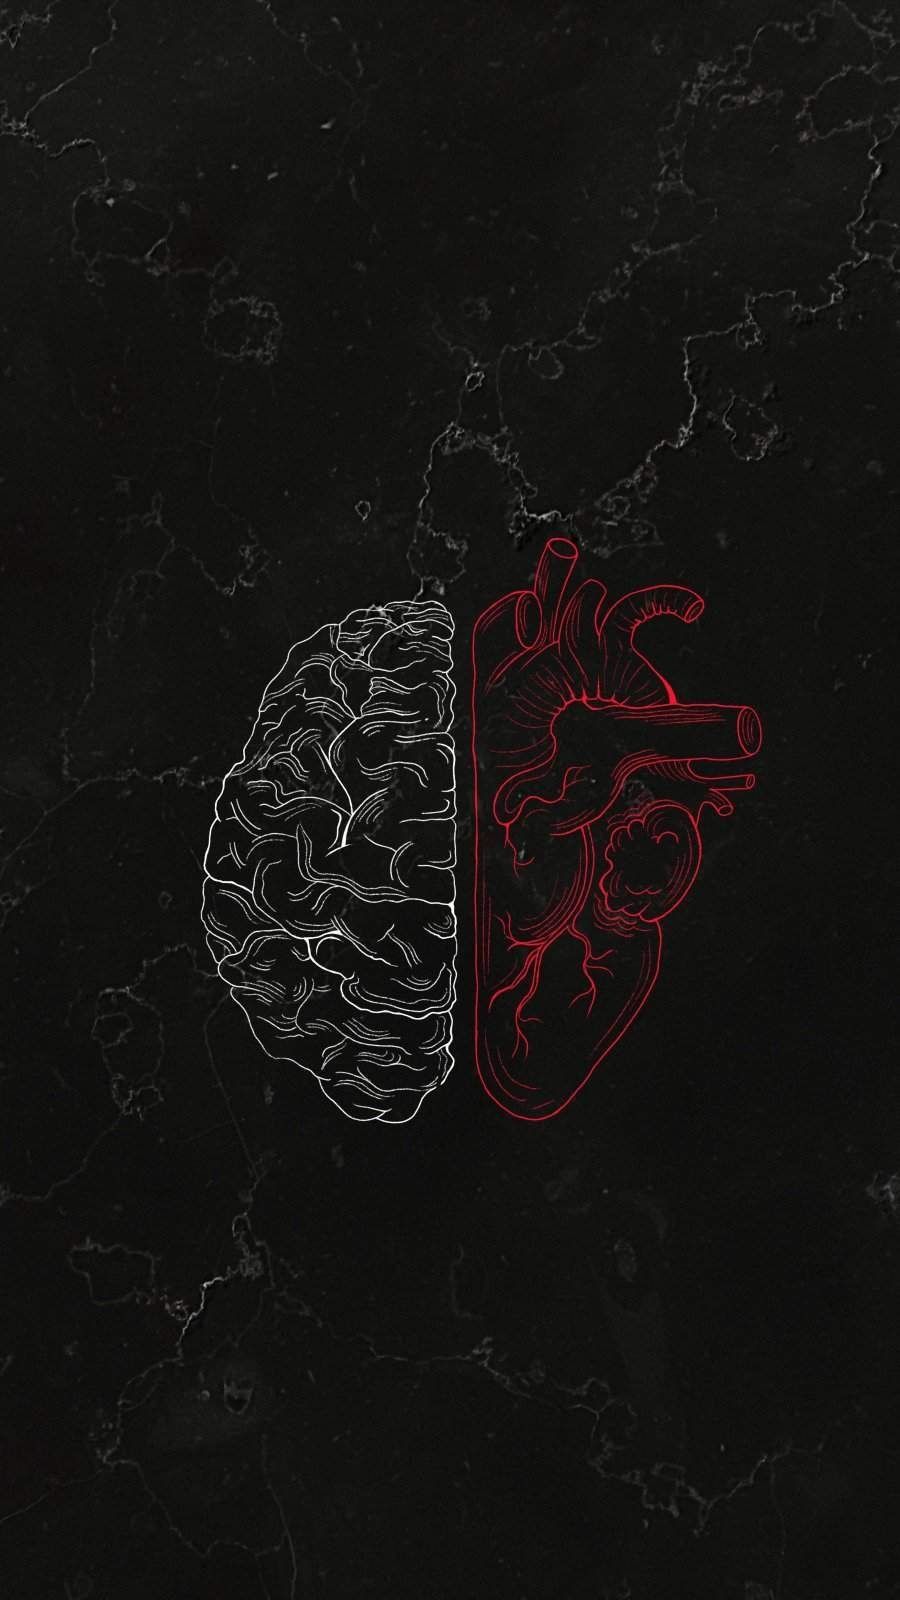 IPhone wallpaper of a brain and heart - Anatomy